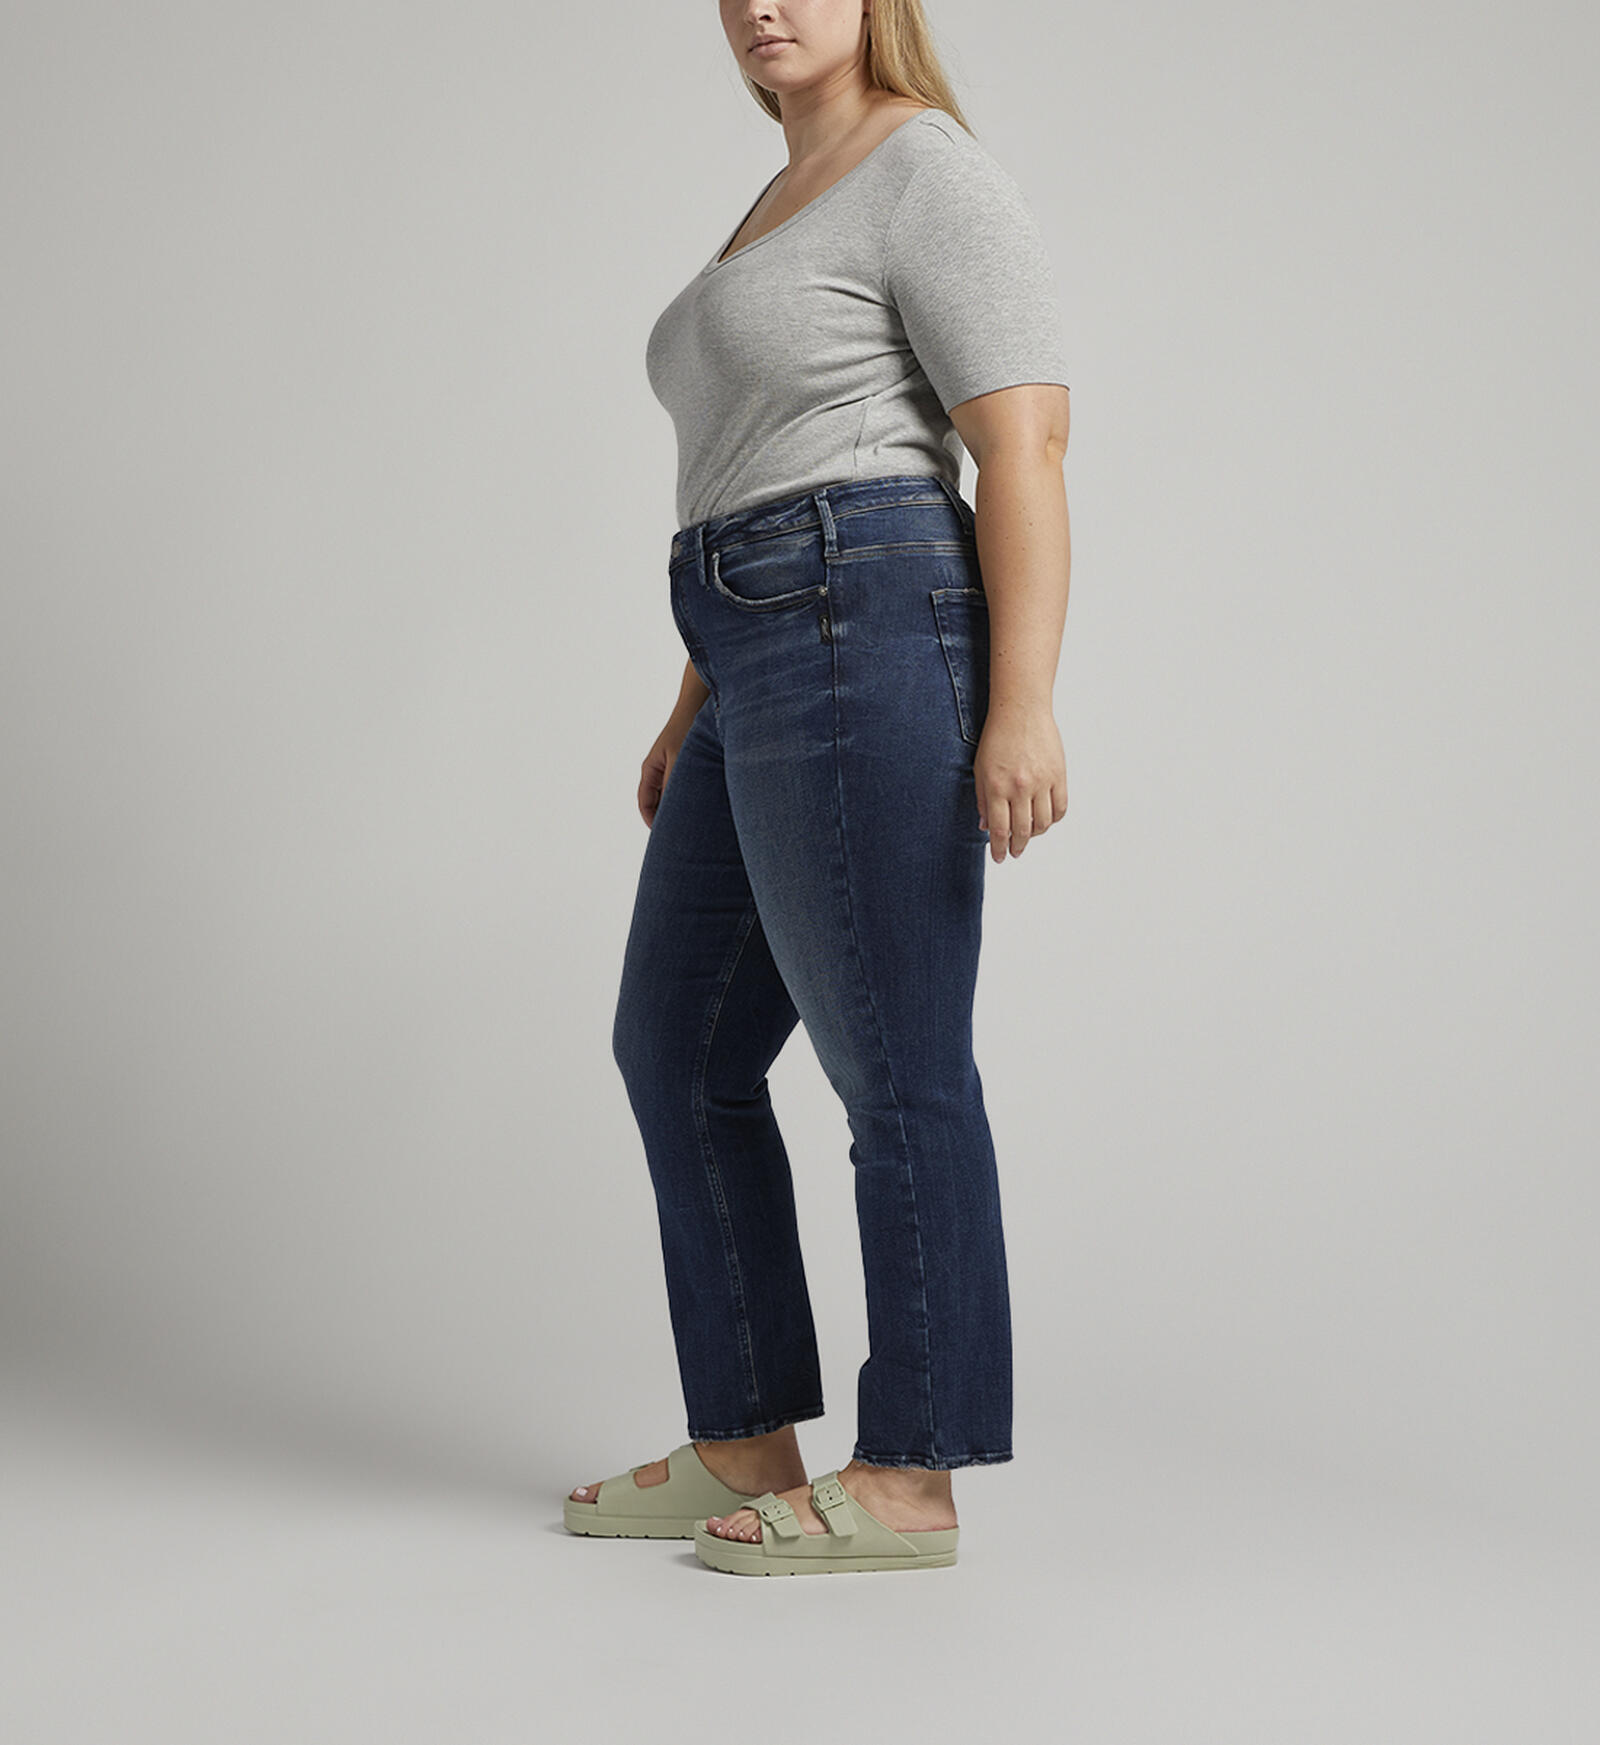 Buy Infinite Fit High Rise Straight Leg Jeans Plus Size for USD